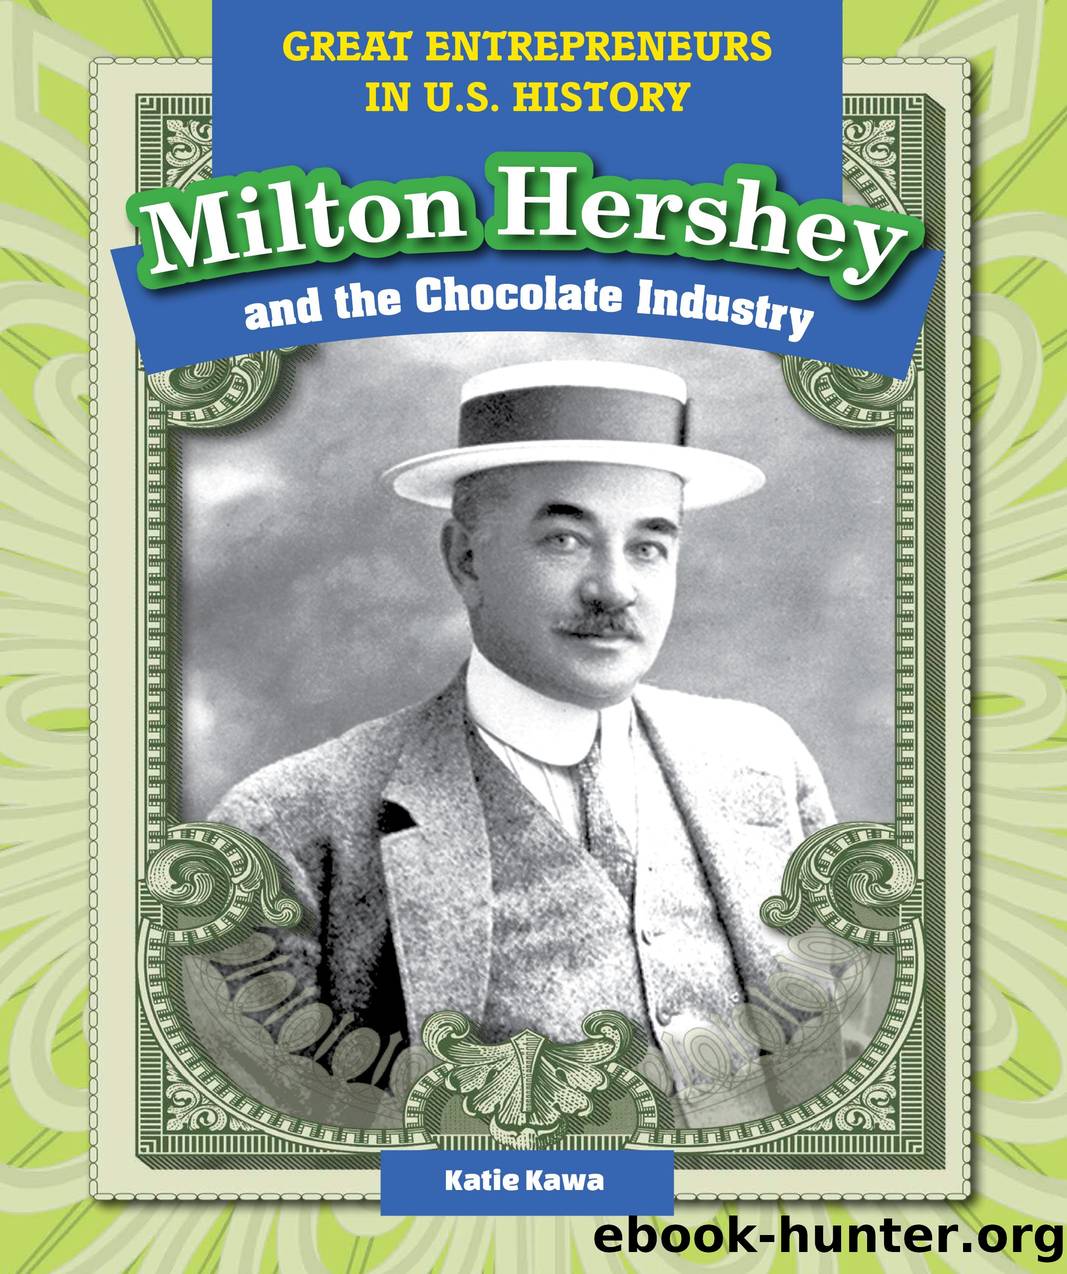 MILTON HERSHEY AND THE CHOCOLATE INDUSTRY by KATIE KAWA